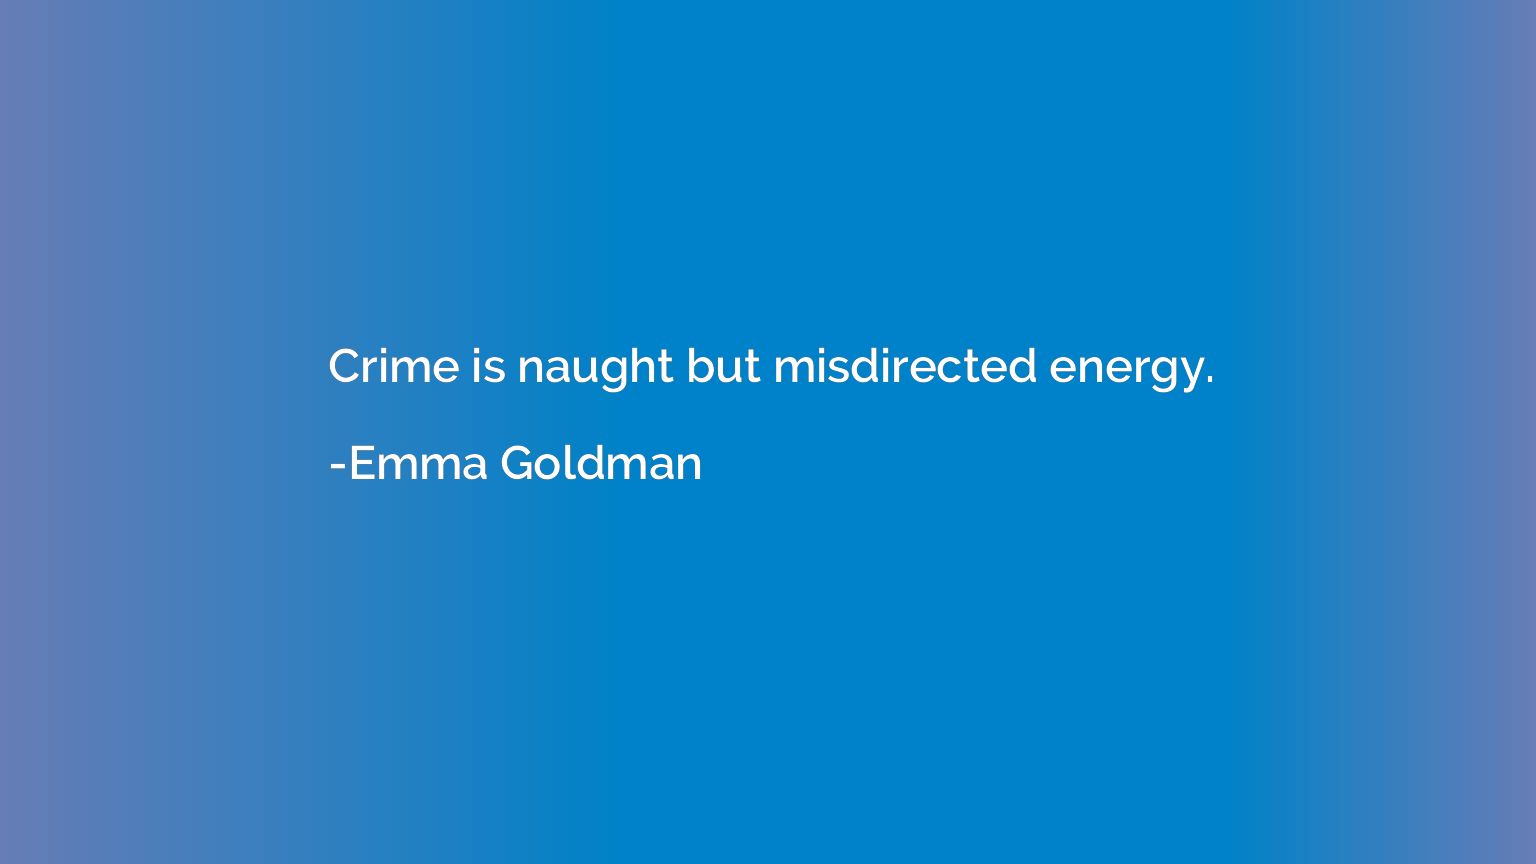 Crime is naught but misdirected energy.